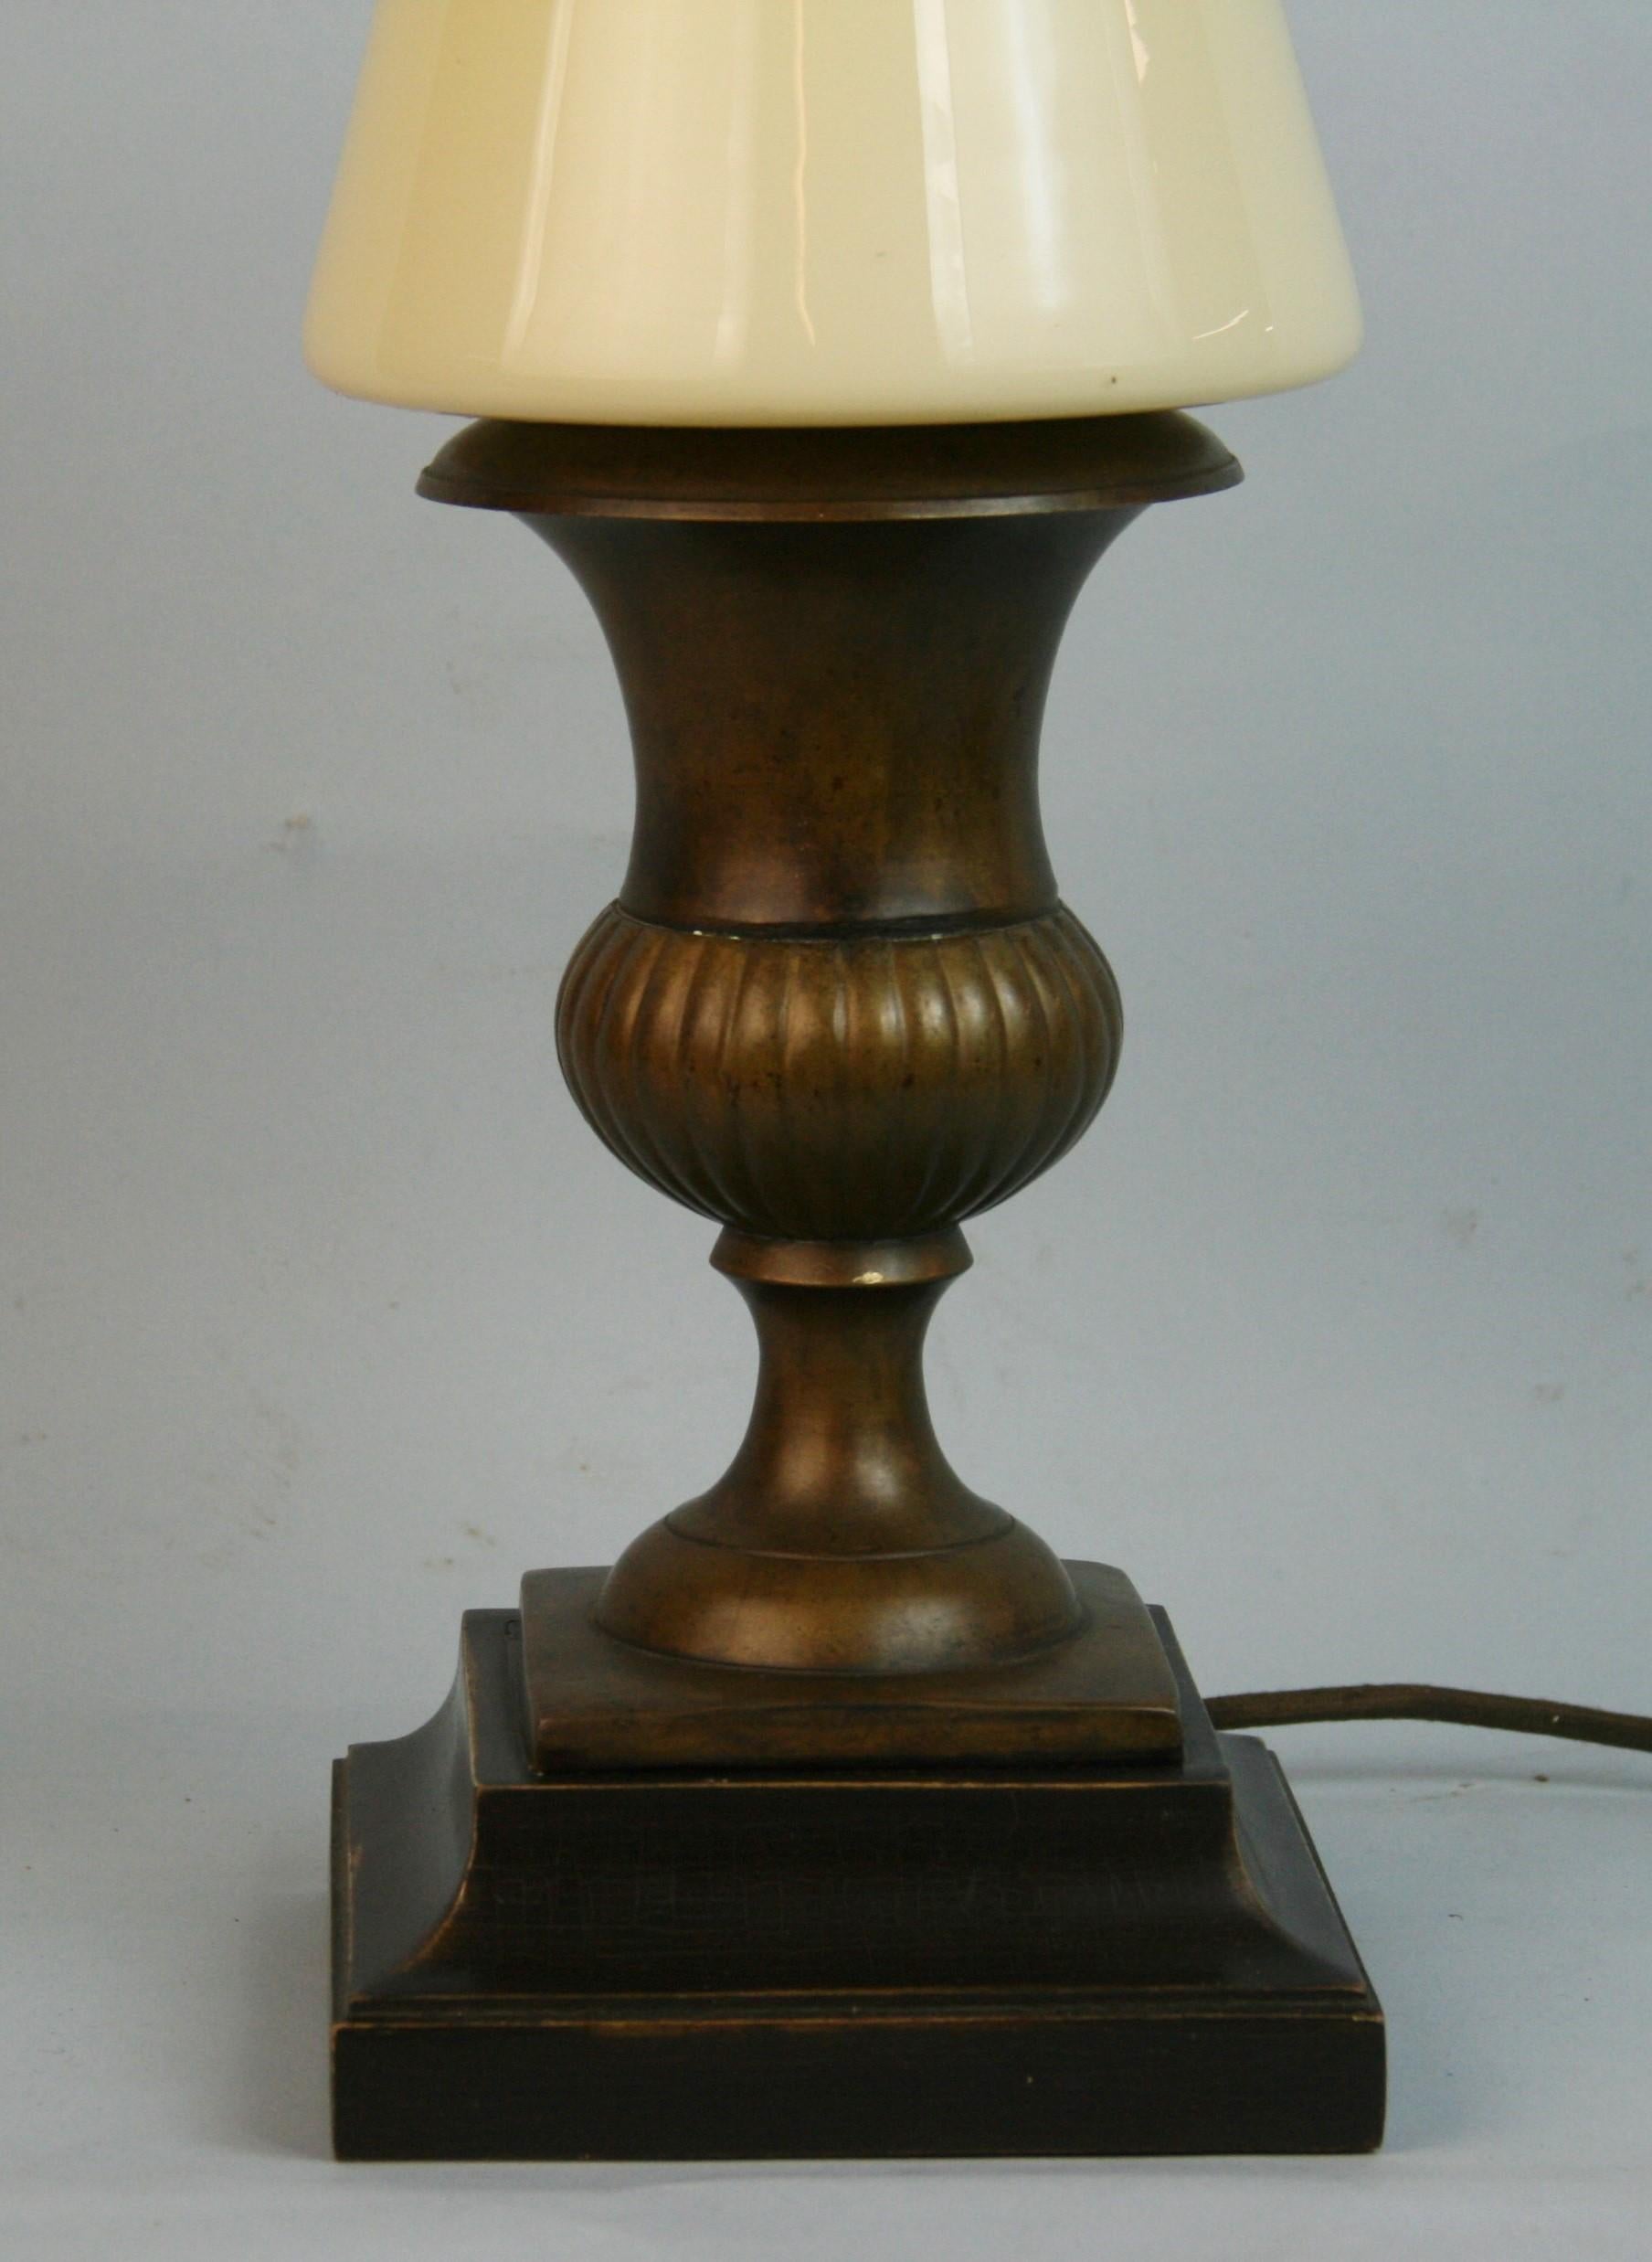 Mid-20th Century Italian Brass Urn Lamp with Murano Glass Shade '2 Available'